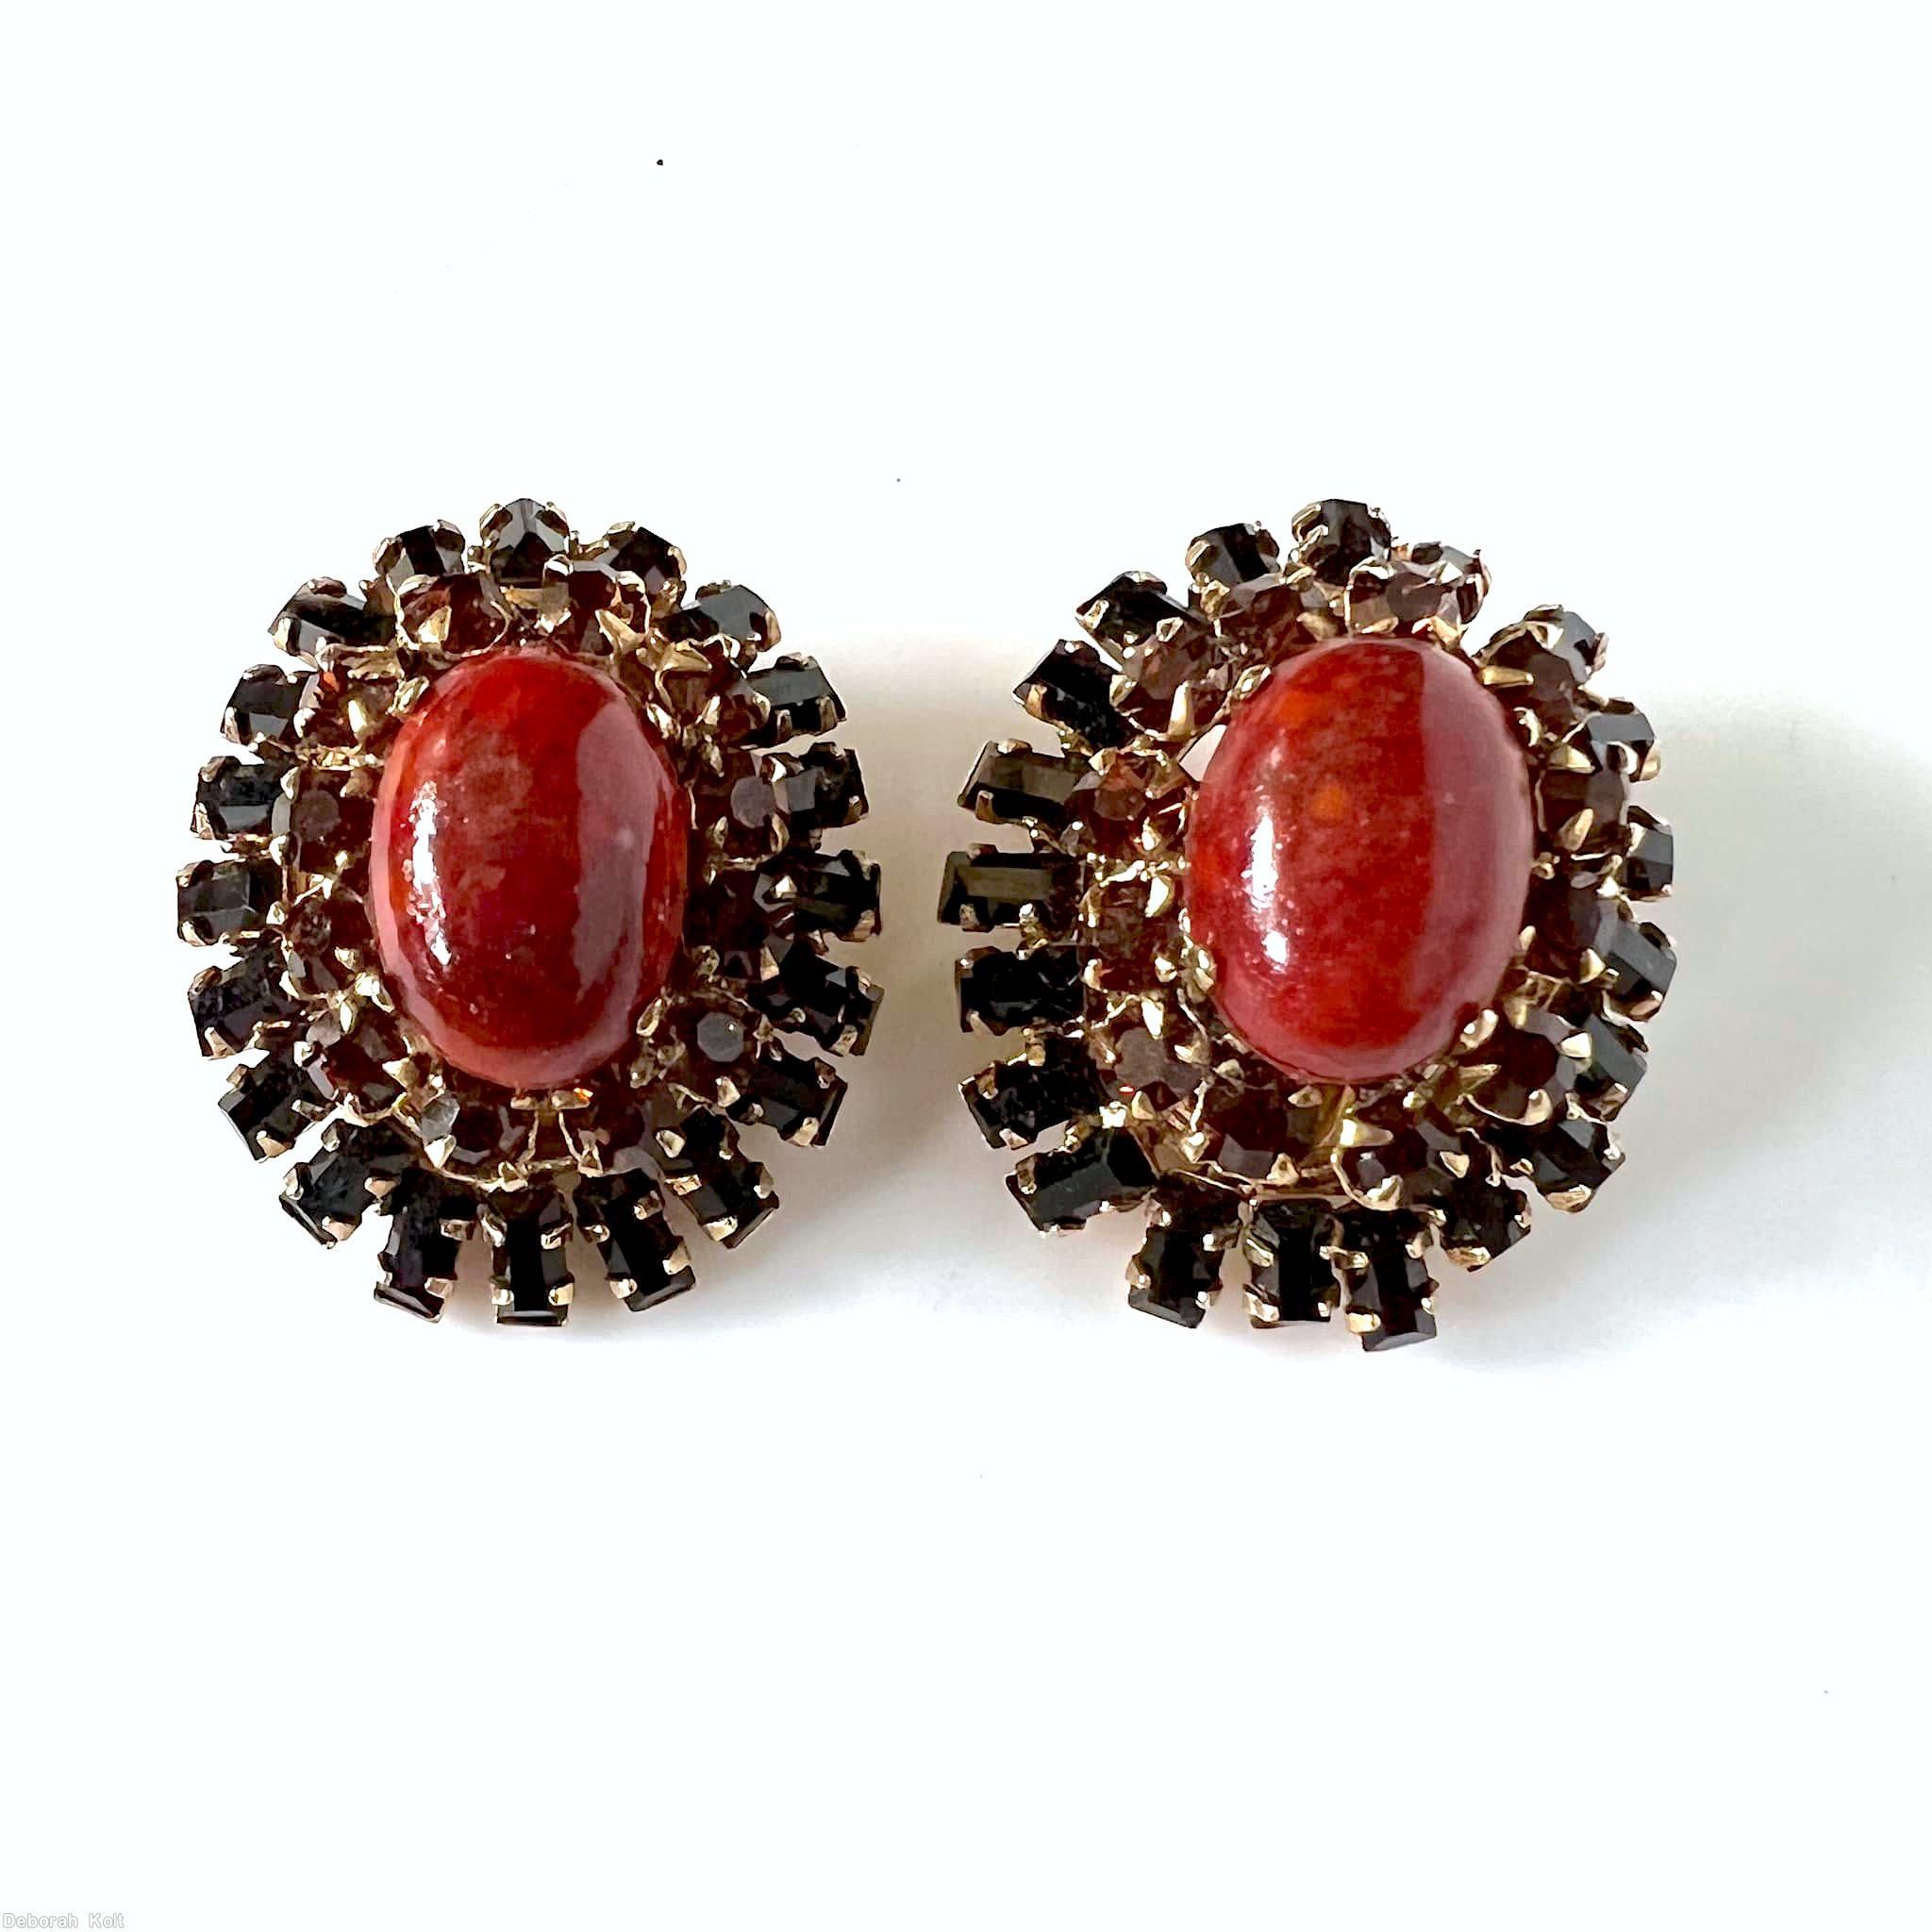 Schreiner domed radial oval earring hook eye 2 rounds large oval cab center 12 surrounding small chaton 19 baguette outside marbled red large oval cab dark red small chaton jet small baguette goldtone jewelry